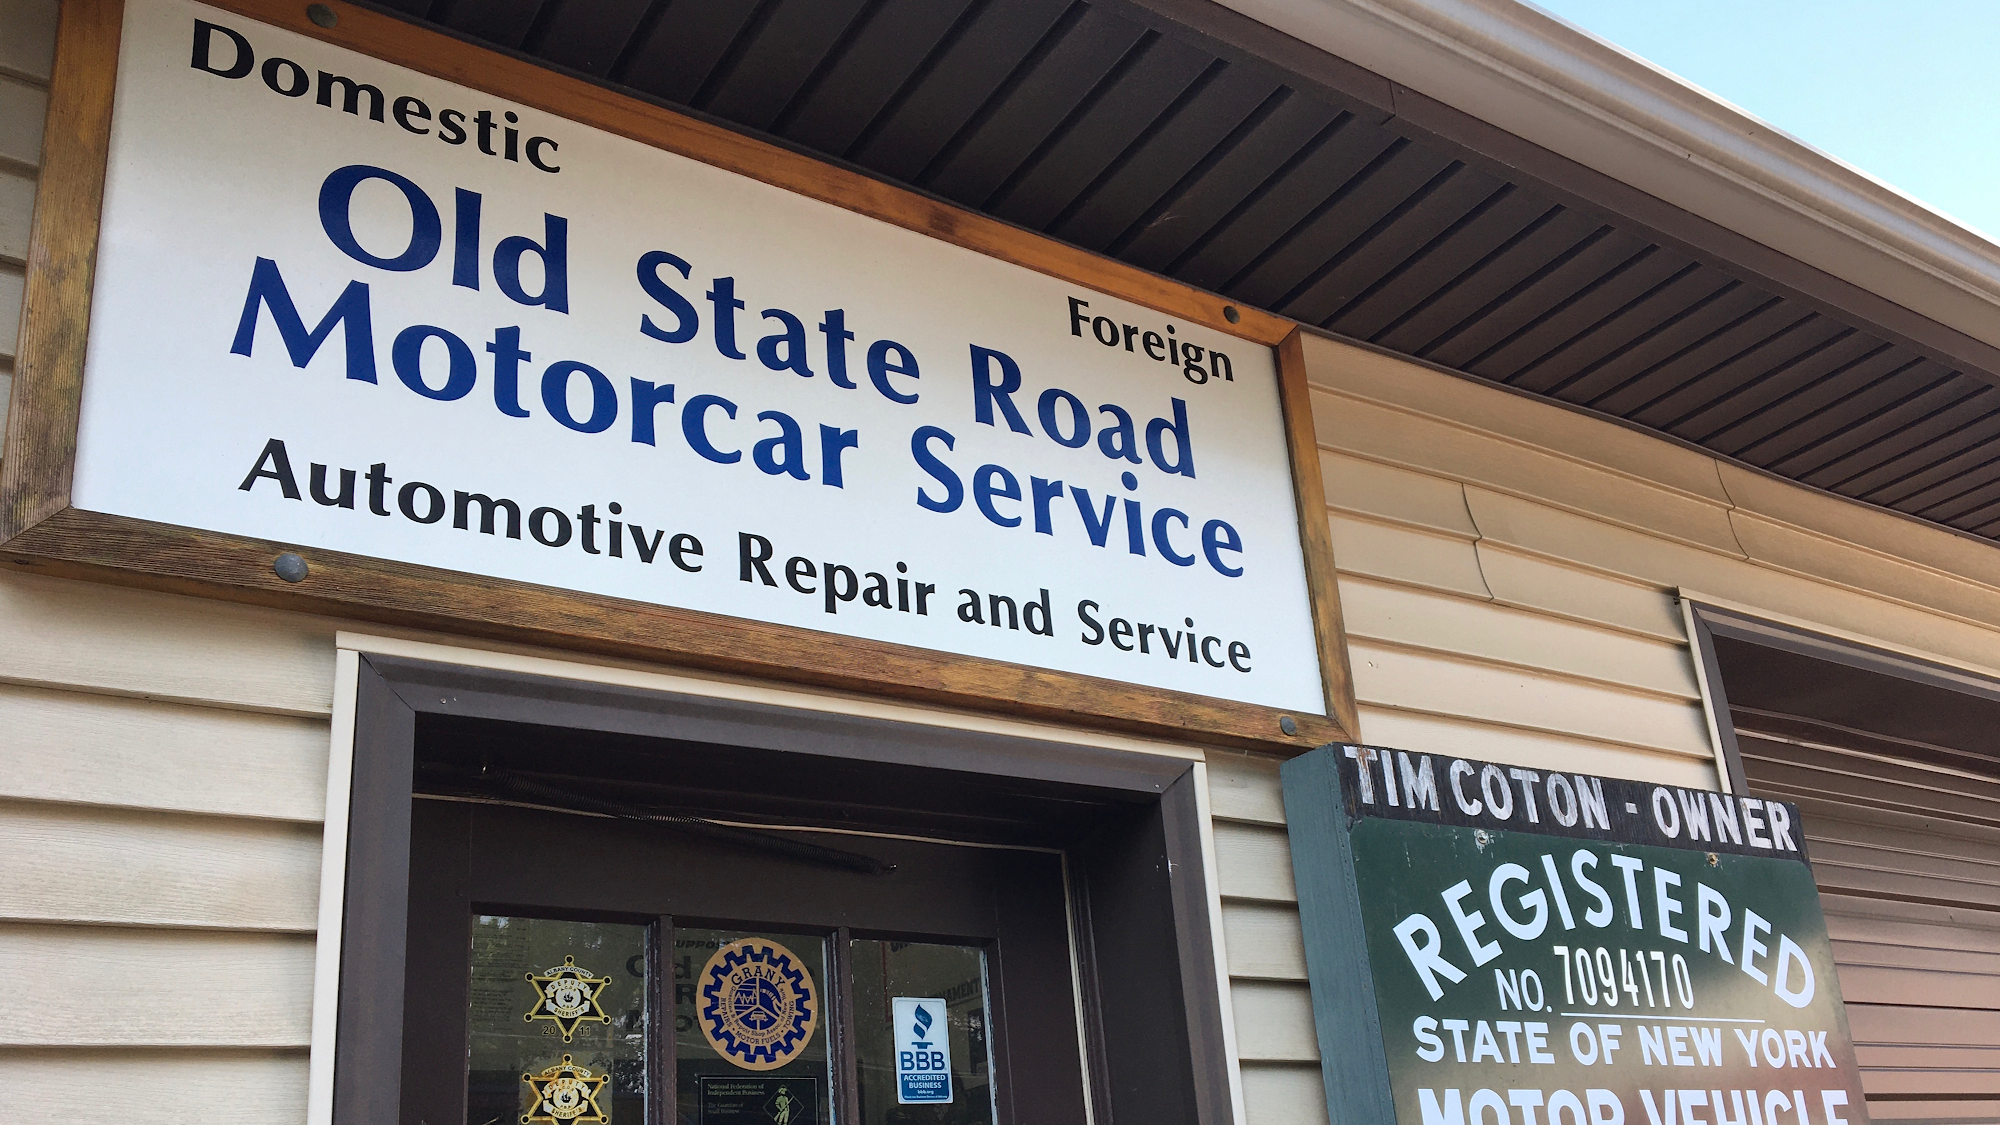 Old State Road Motorcar Service